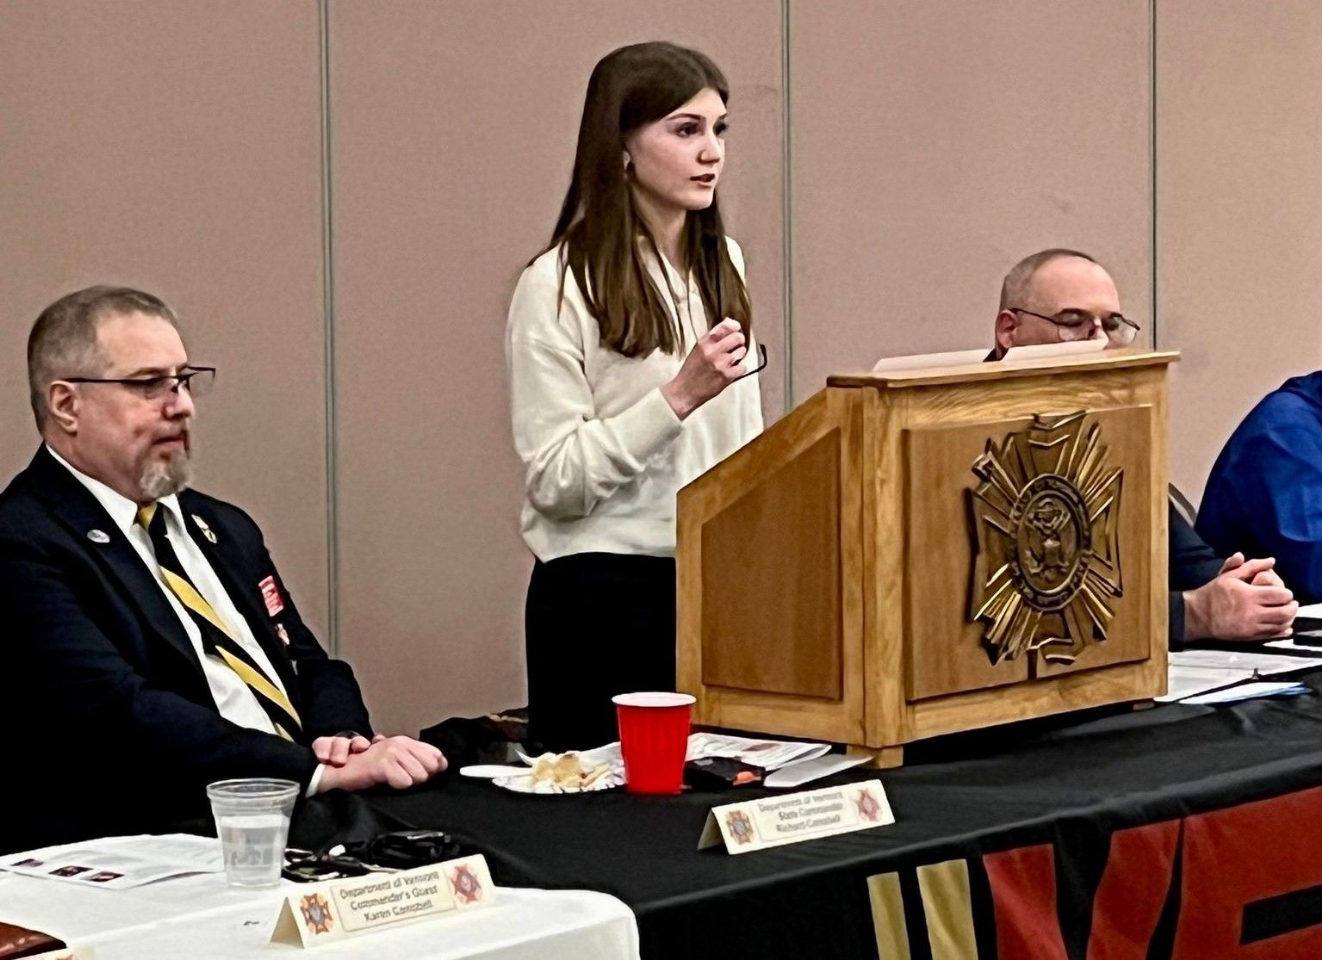 Voice of Democracy Winner Amelia Partlow giving her speech at the VOD/PP Banquet held at Brattleboro Post 1034 on January 7th, 2023 